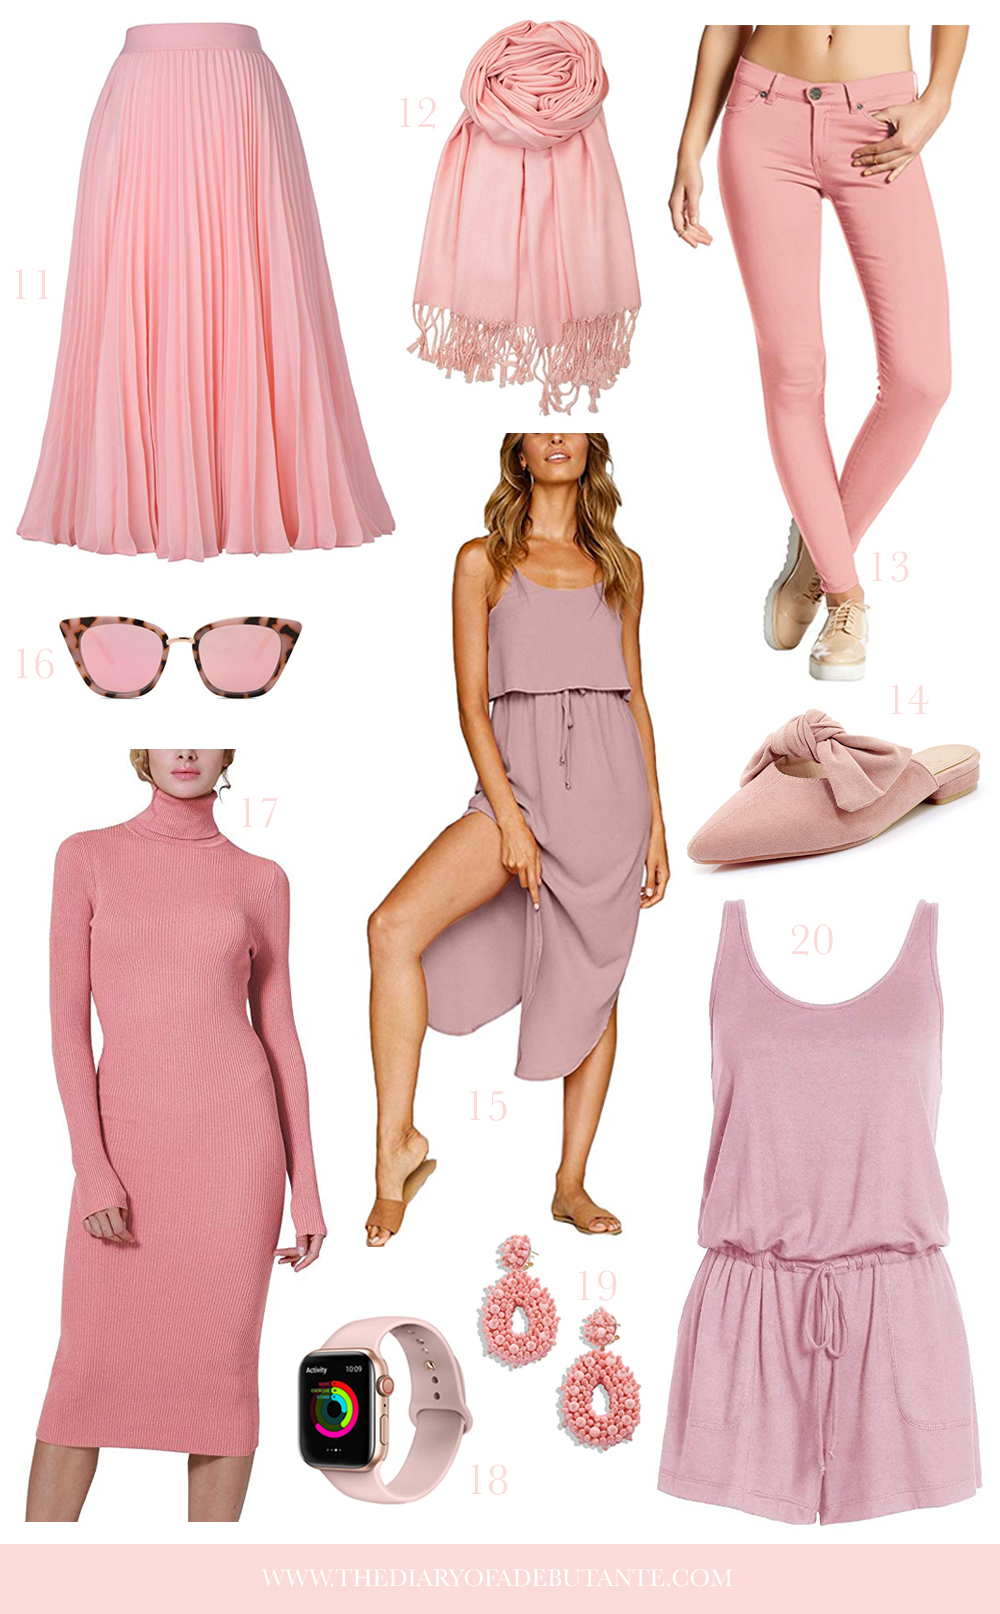 The Cutest Pink Fashion Finds on Amazon under $50 by affordable fashion blogger Stephanie Ziajka on Diary of a Debutante, Amazon Fall Fashion Finds, Best Amazon Fashion Finds